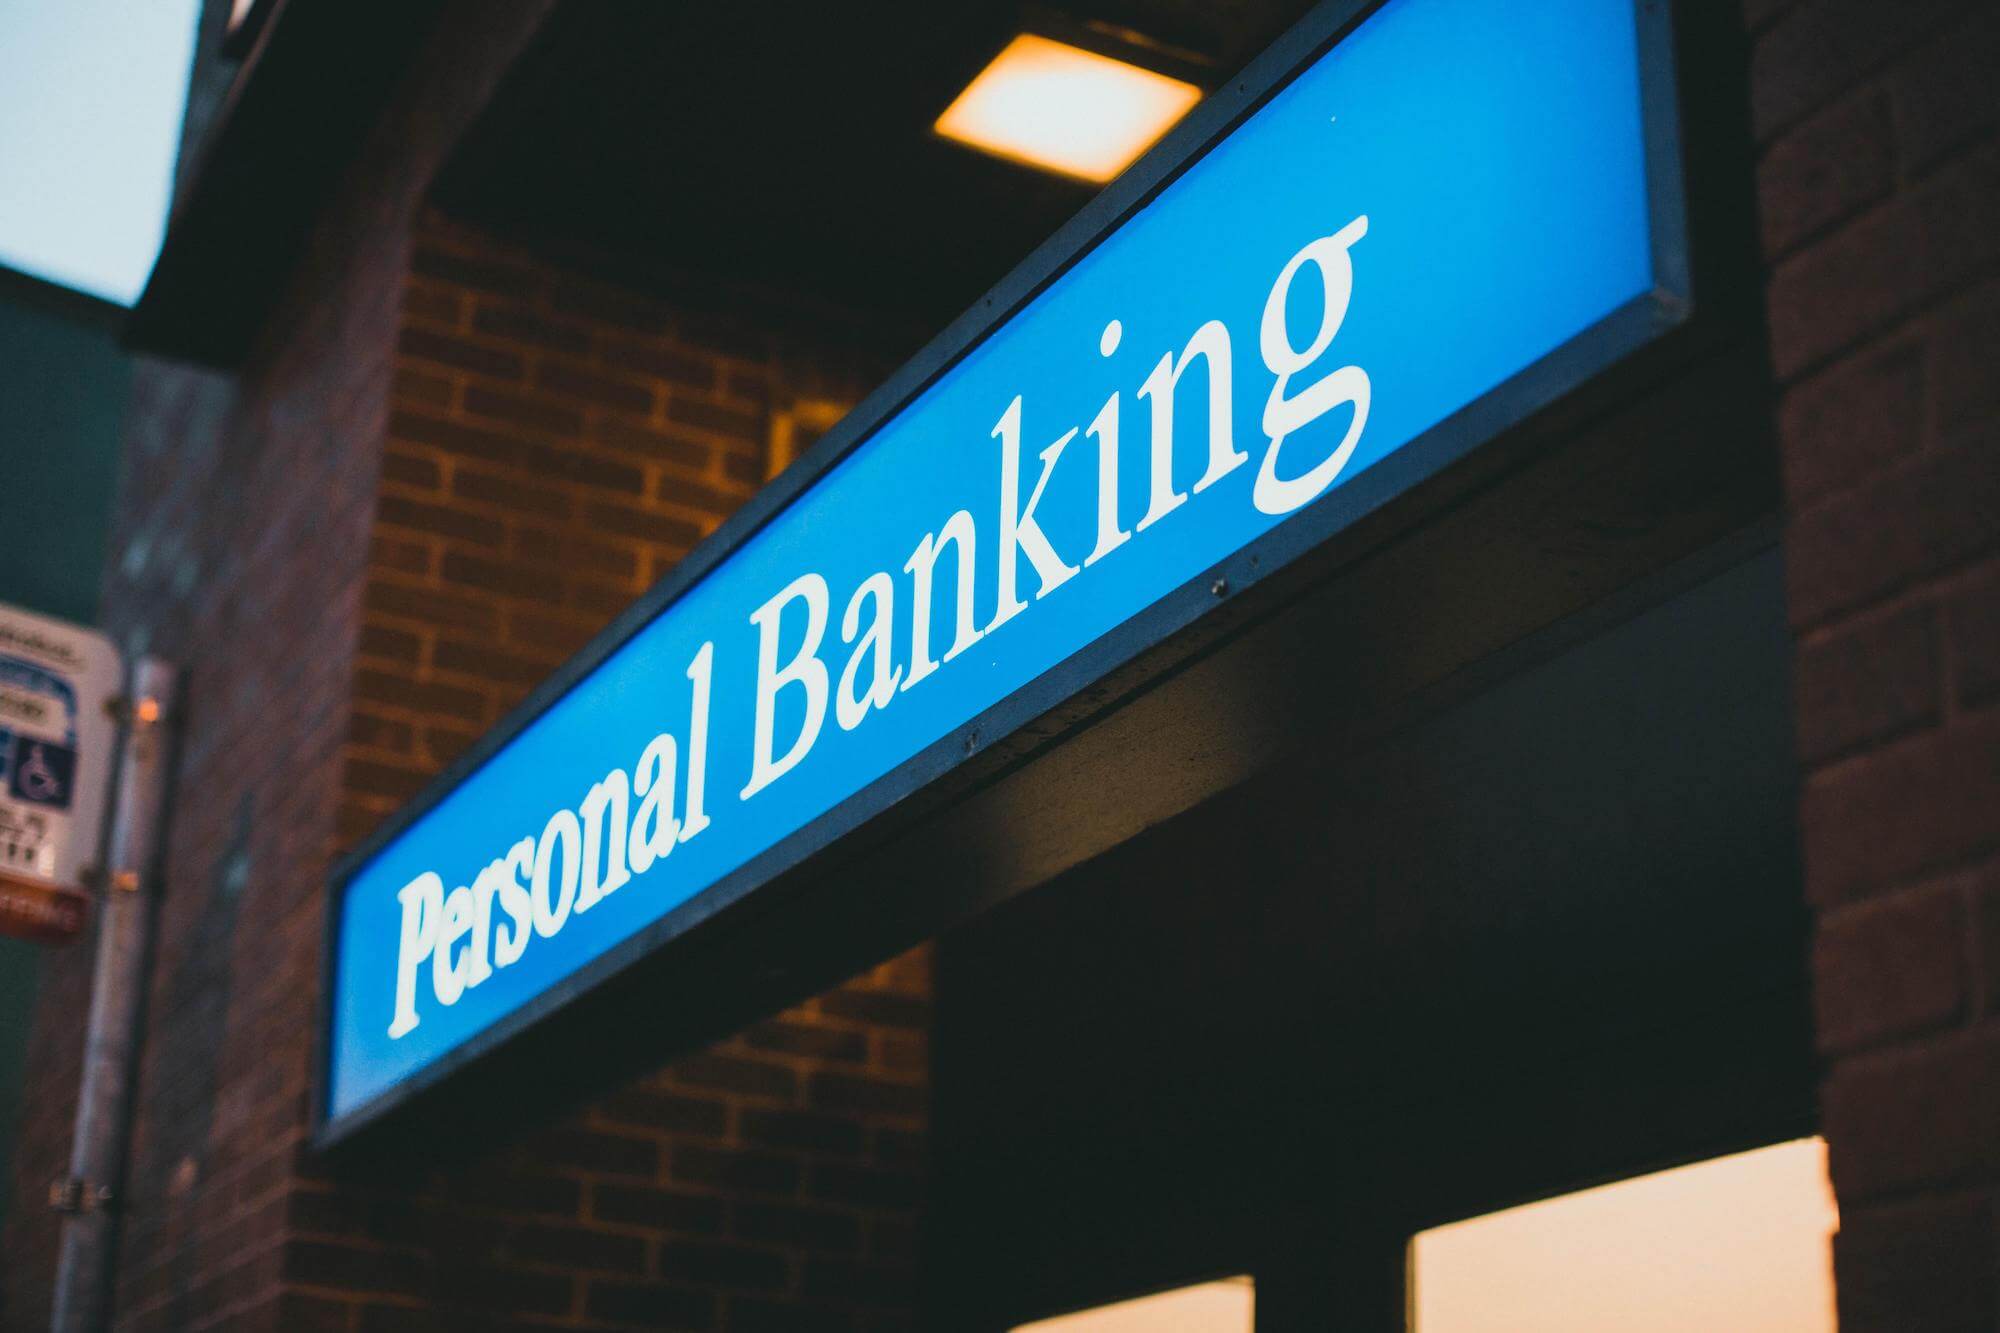 A sign on a bank saying "personal banking"